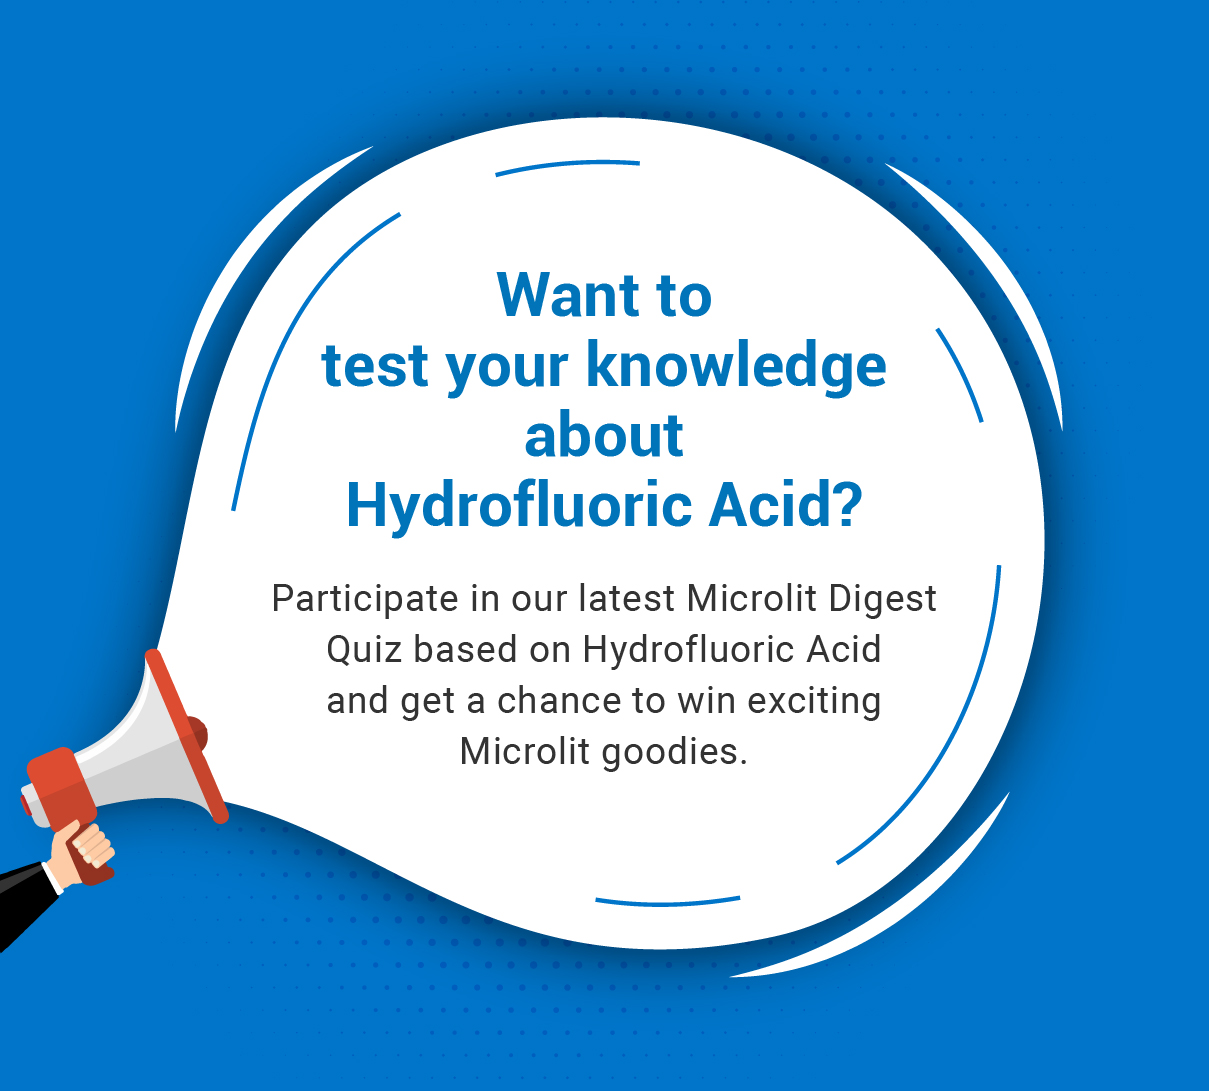 Excited to test your knowledge on Hydrofluoric Acid?